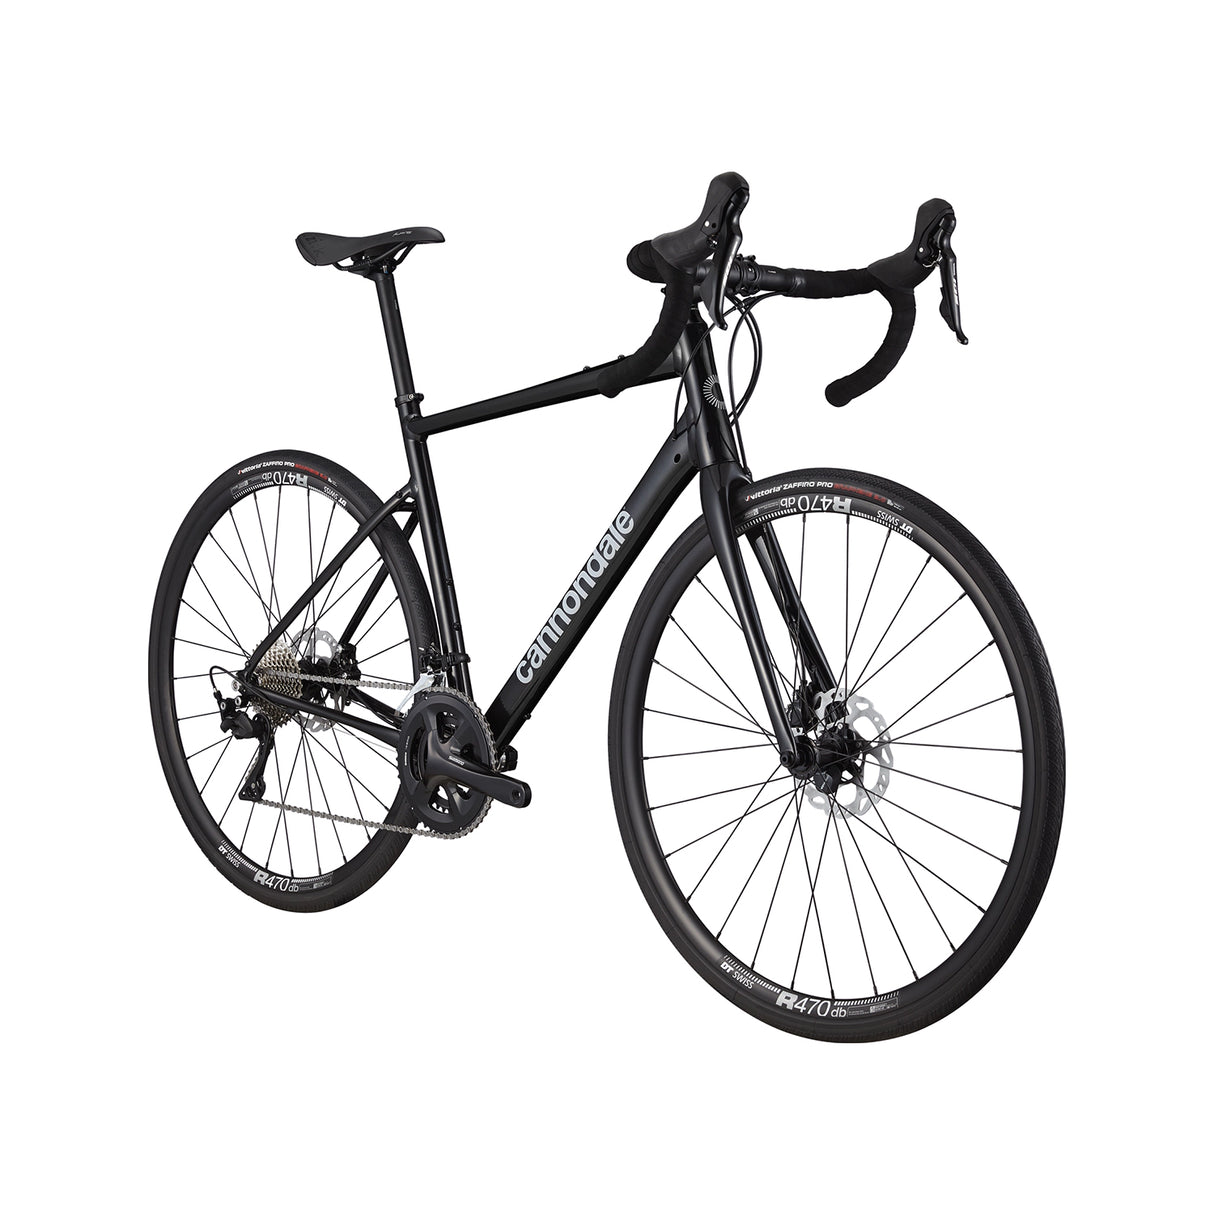 Cannondale Synapse 1 Tiagra Road Bike